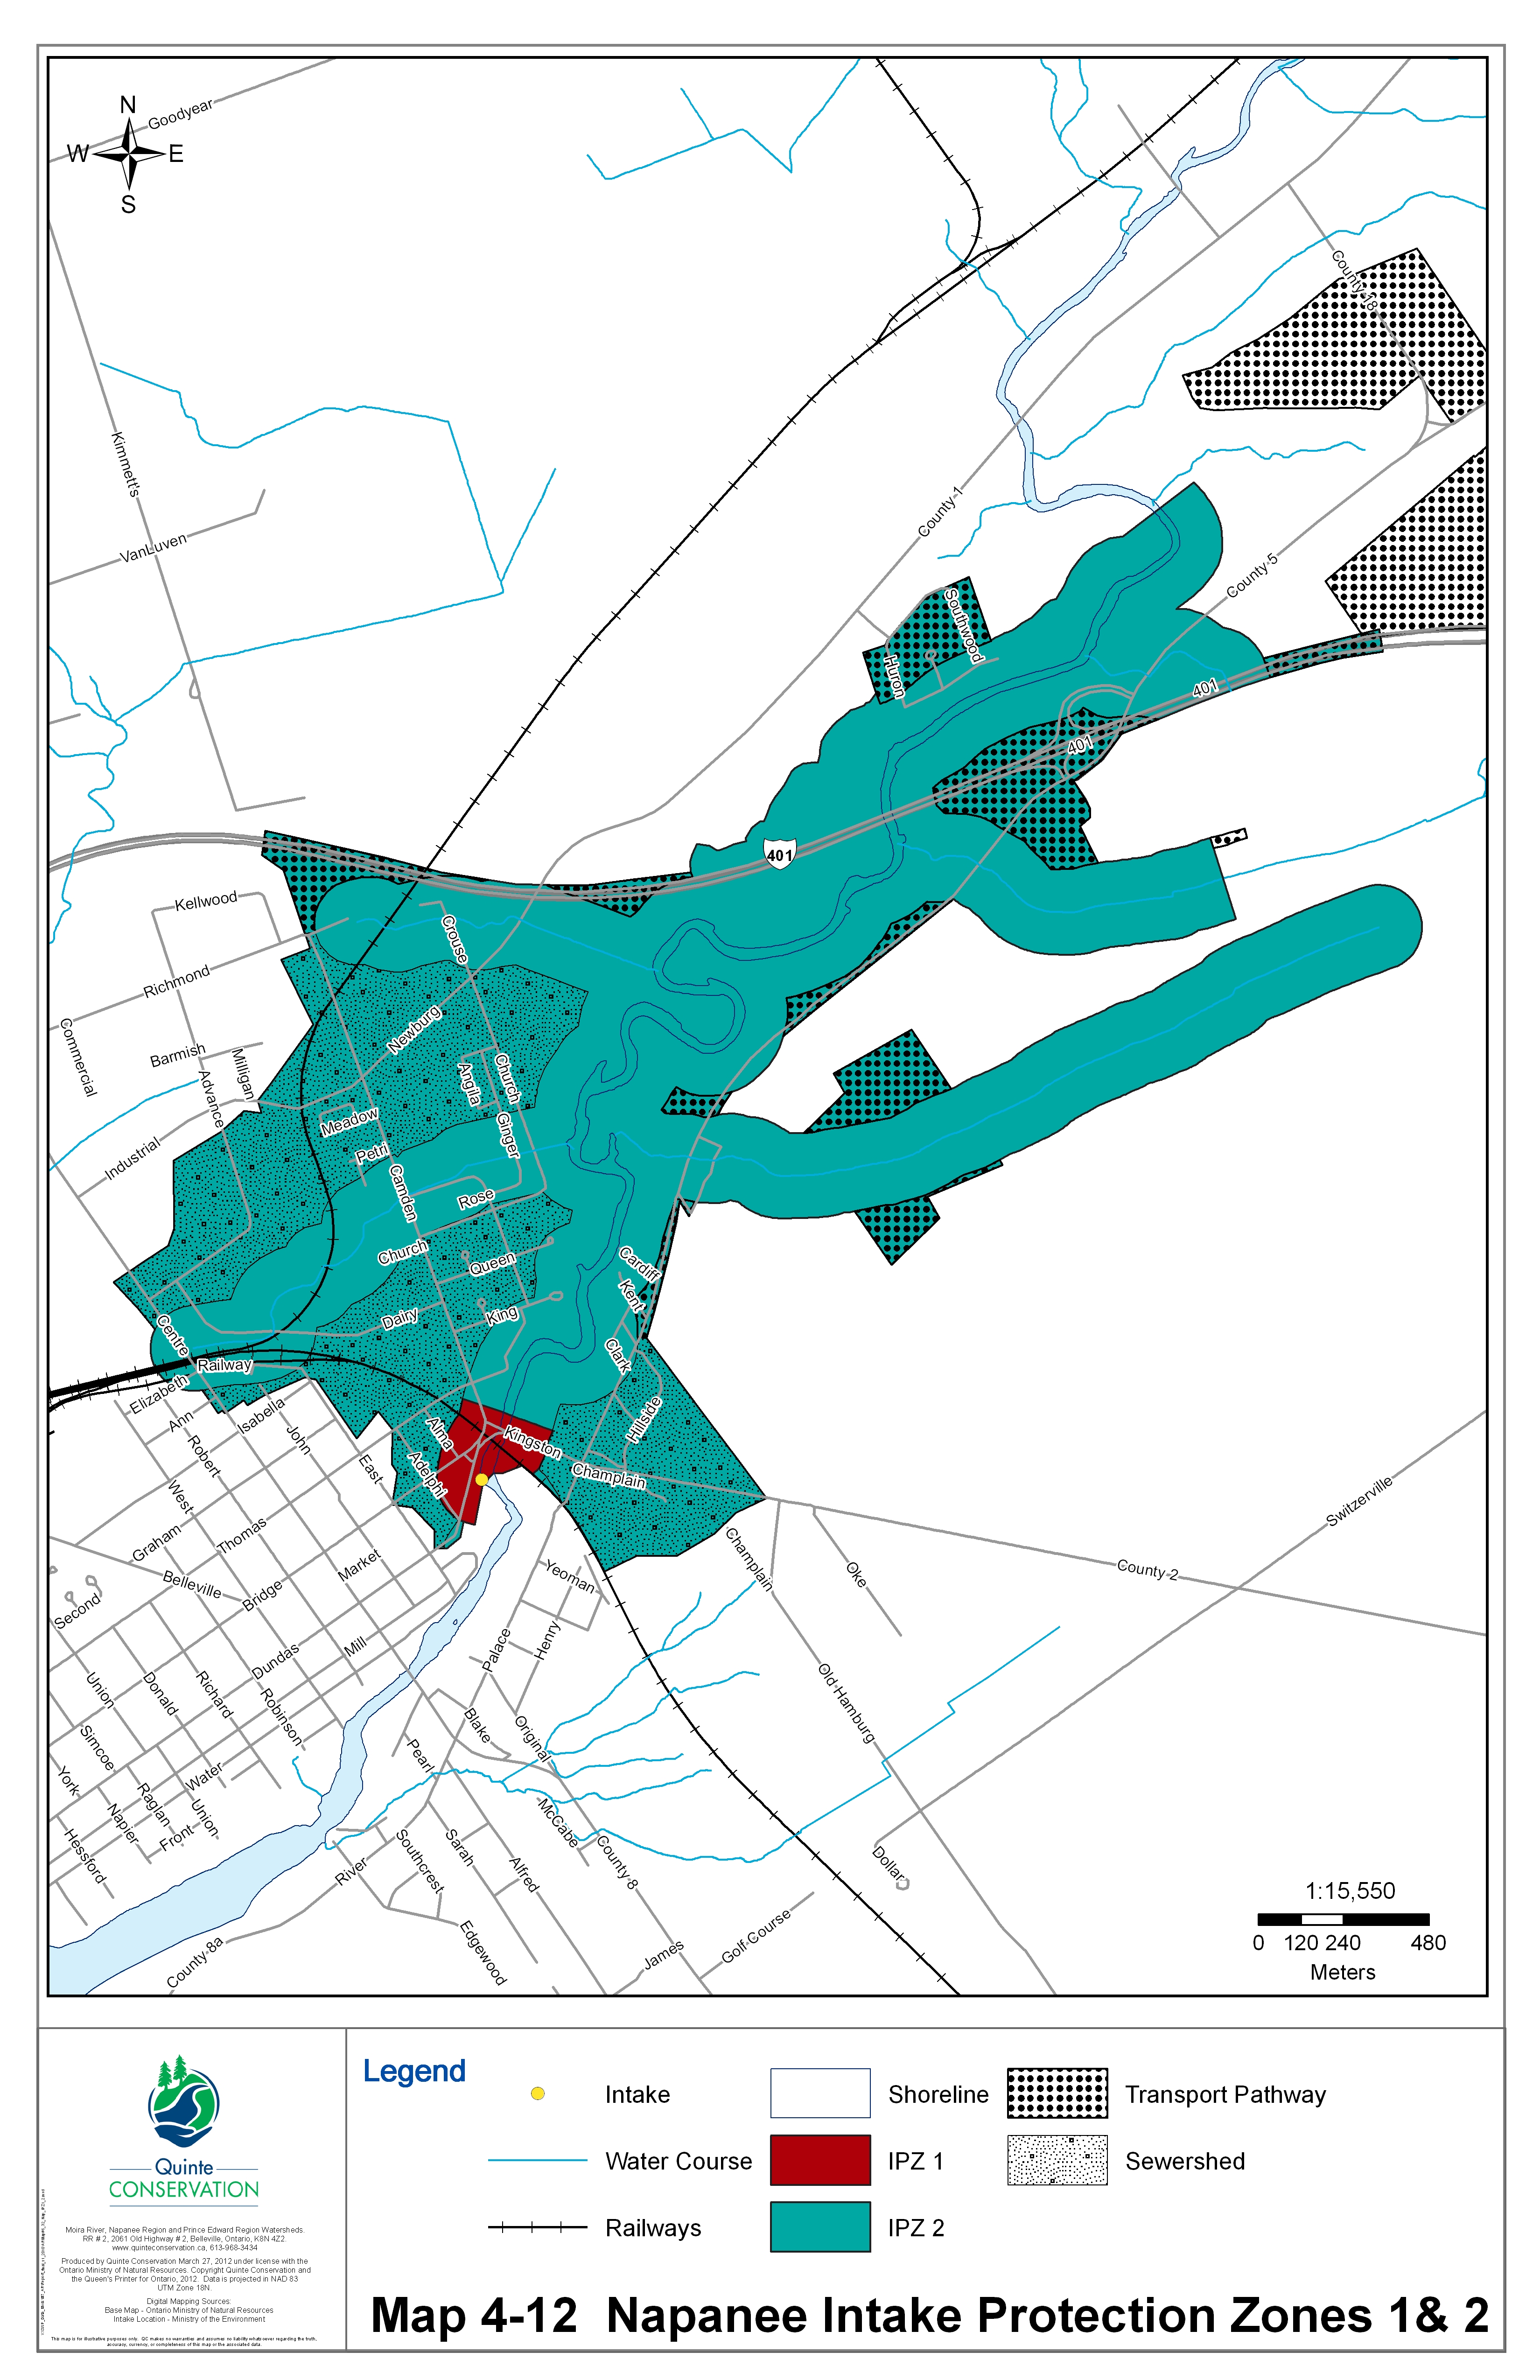 Drinking water systems map for Napanee